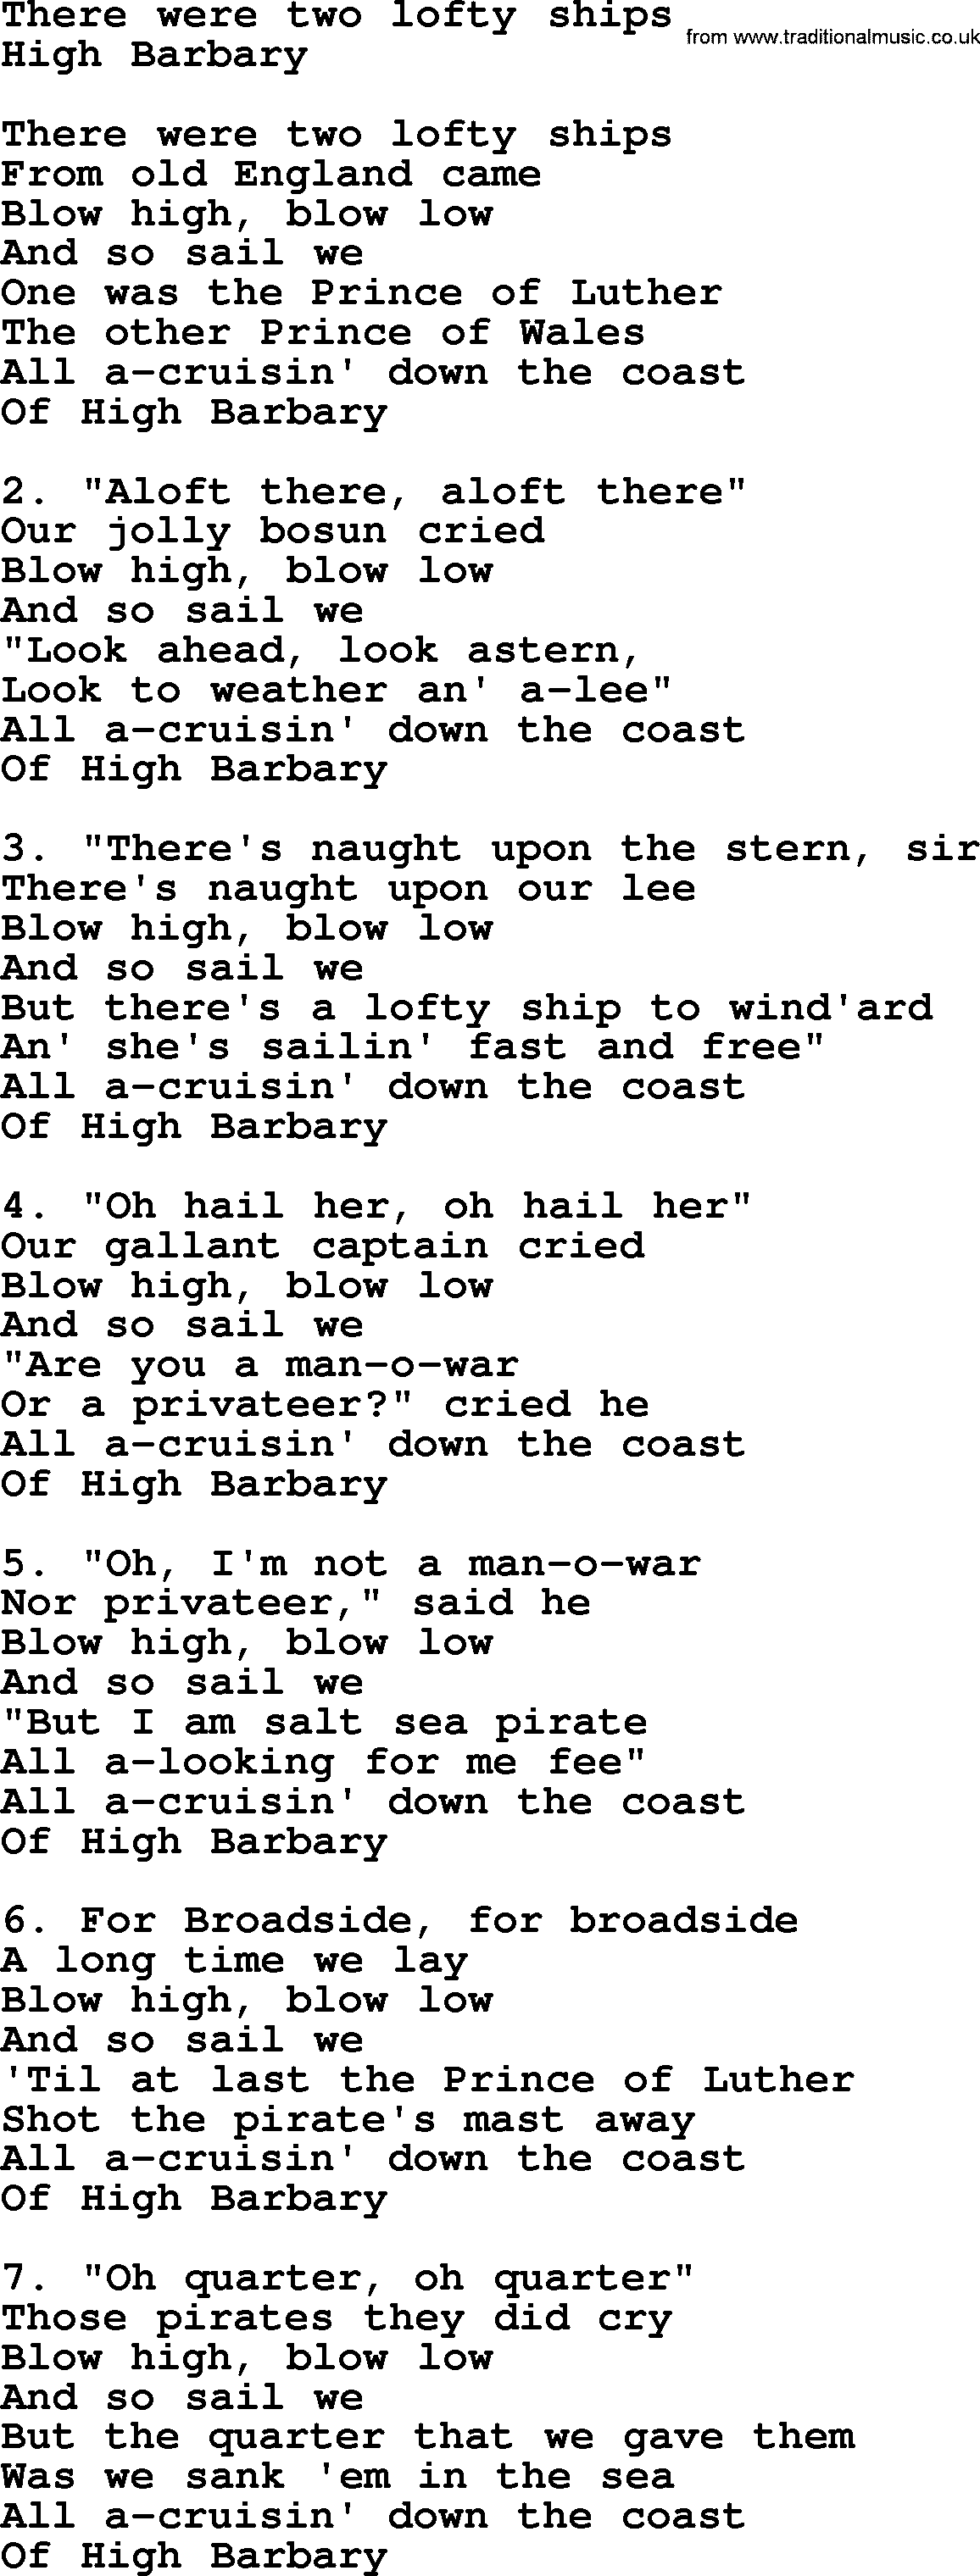 Sea Song or Shantie: There Were Two Lofty Ships, lyrics